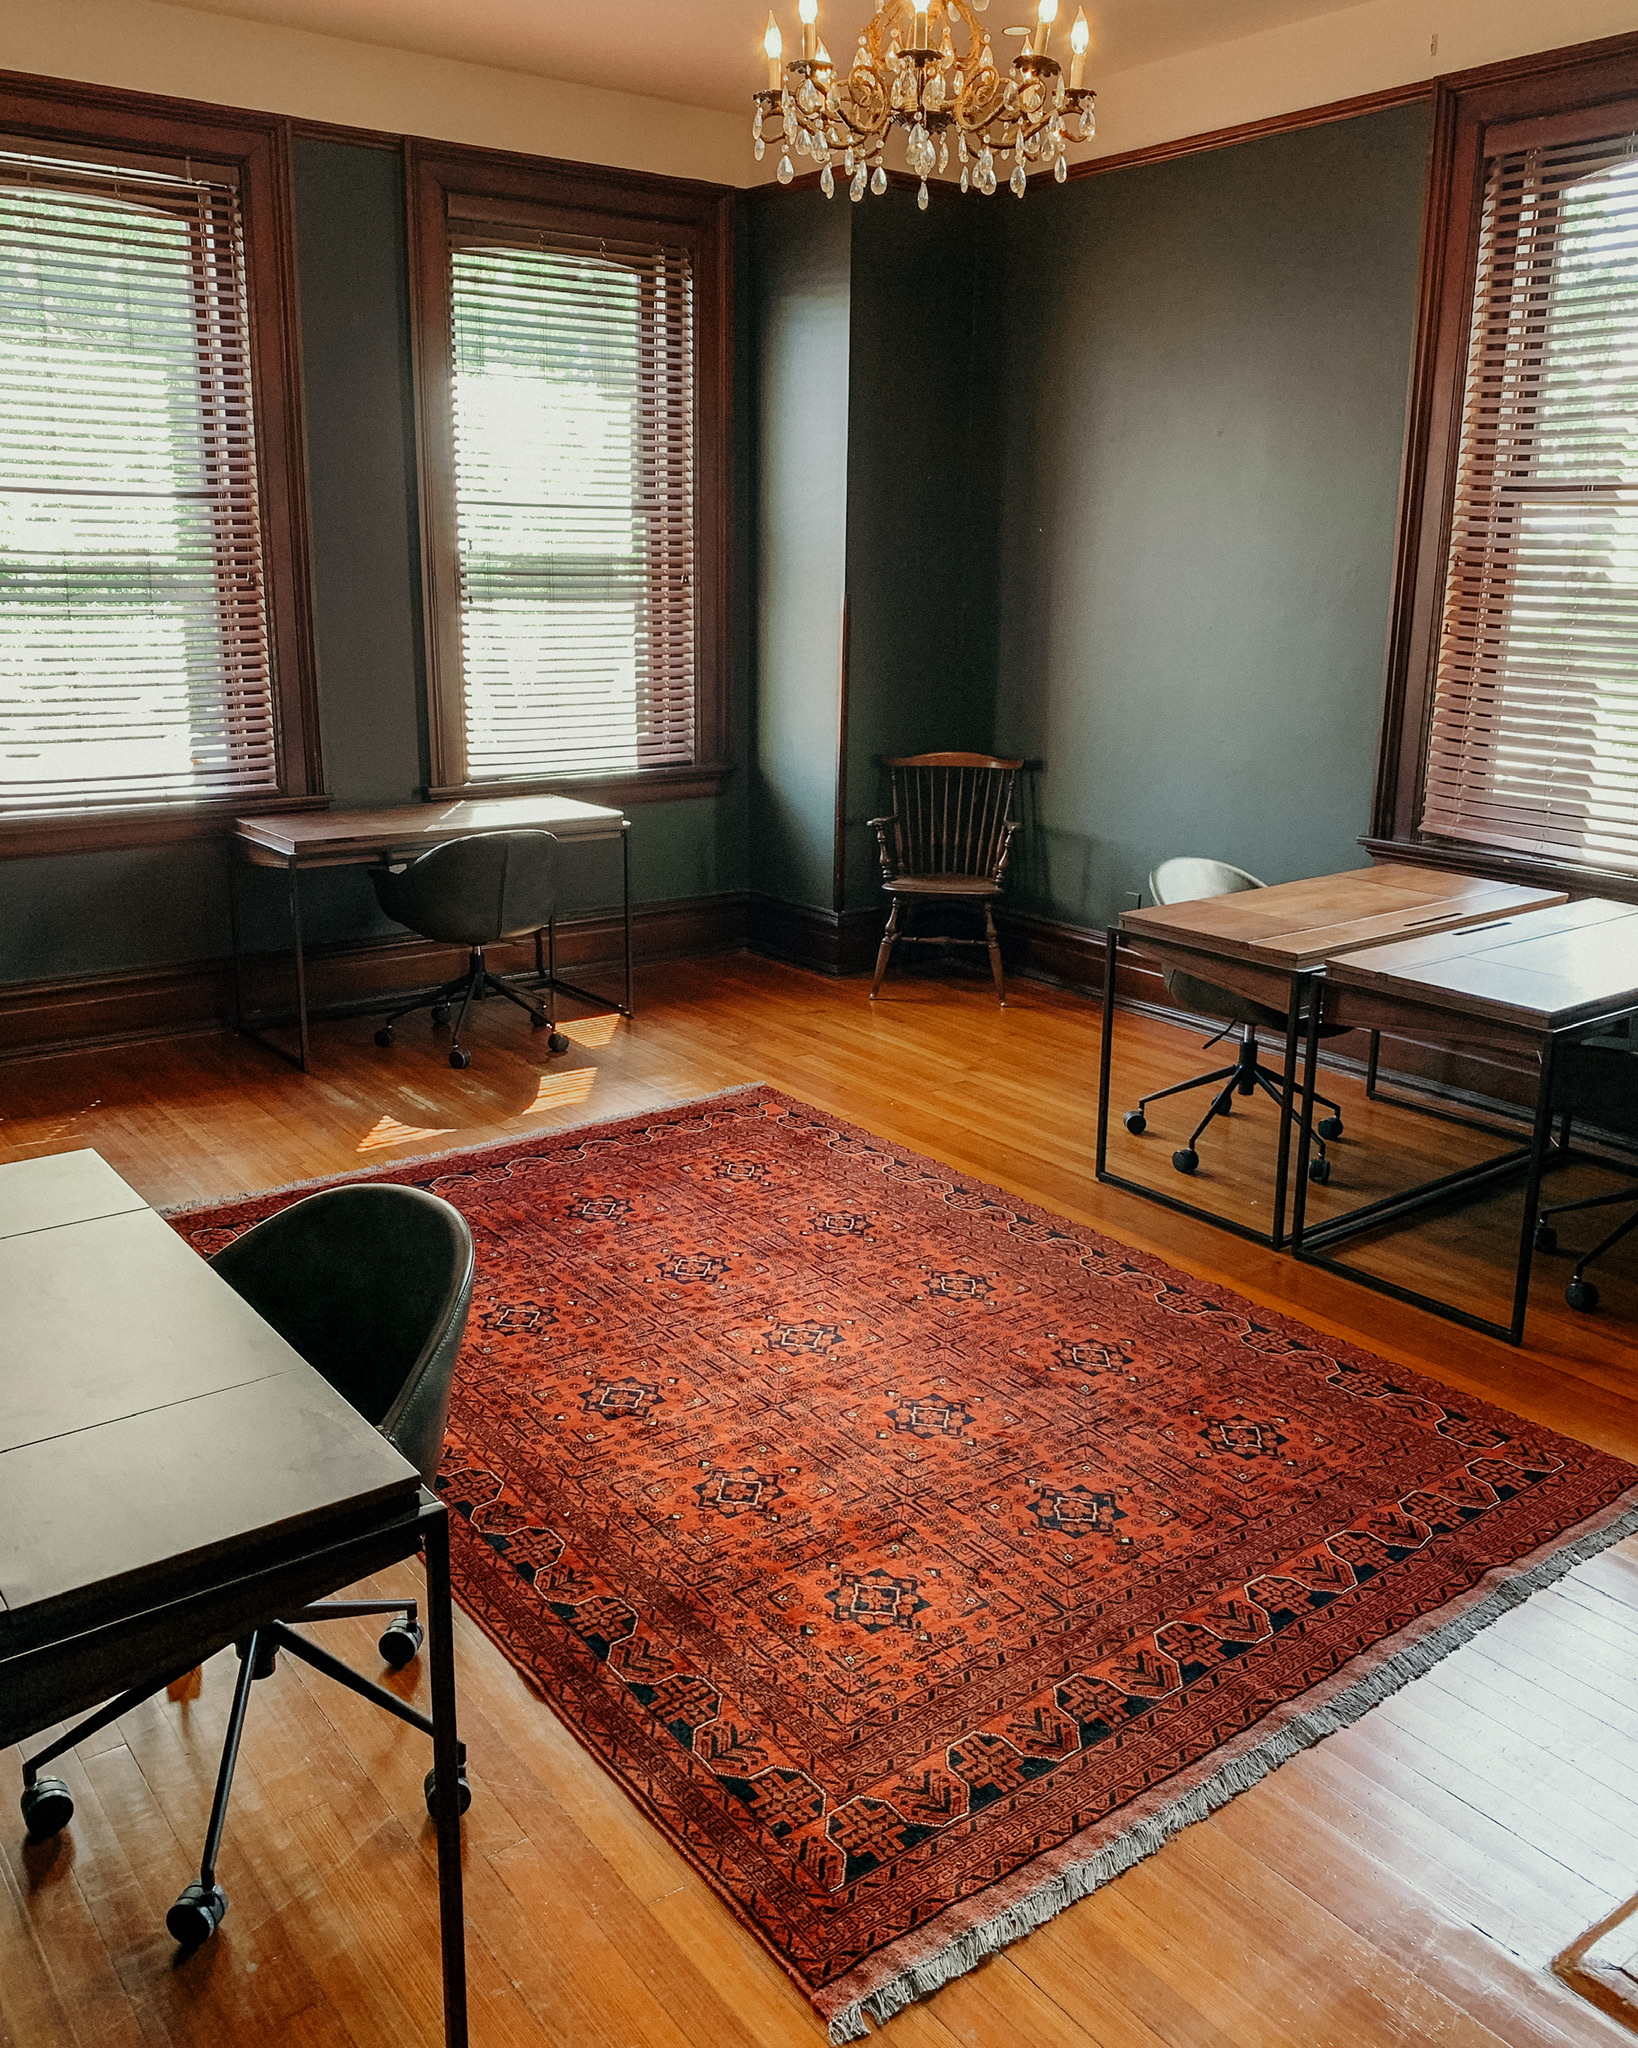 Empty office room with a rug and chairs